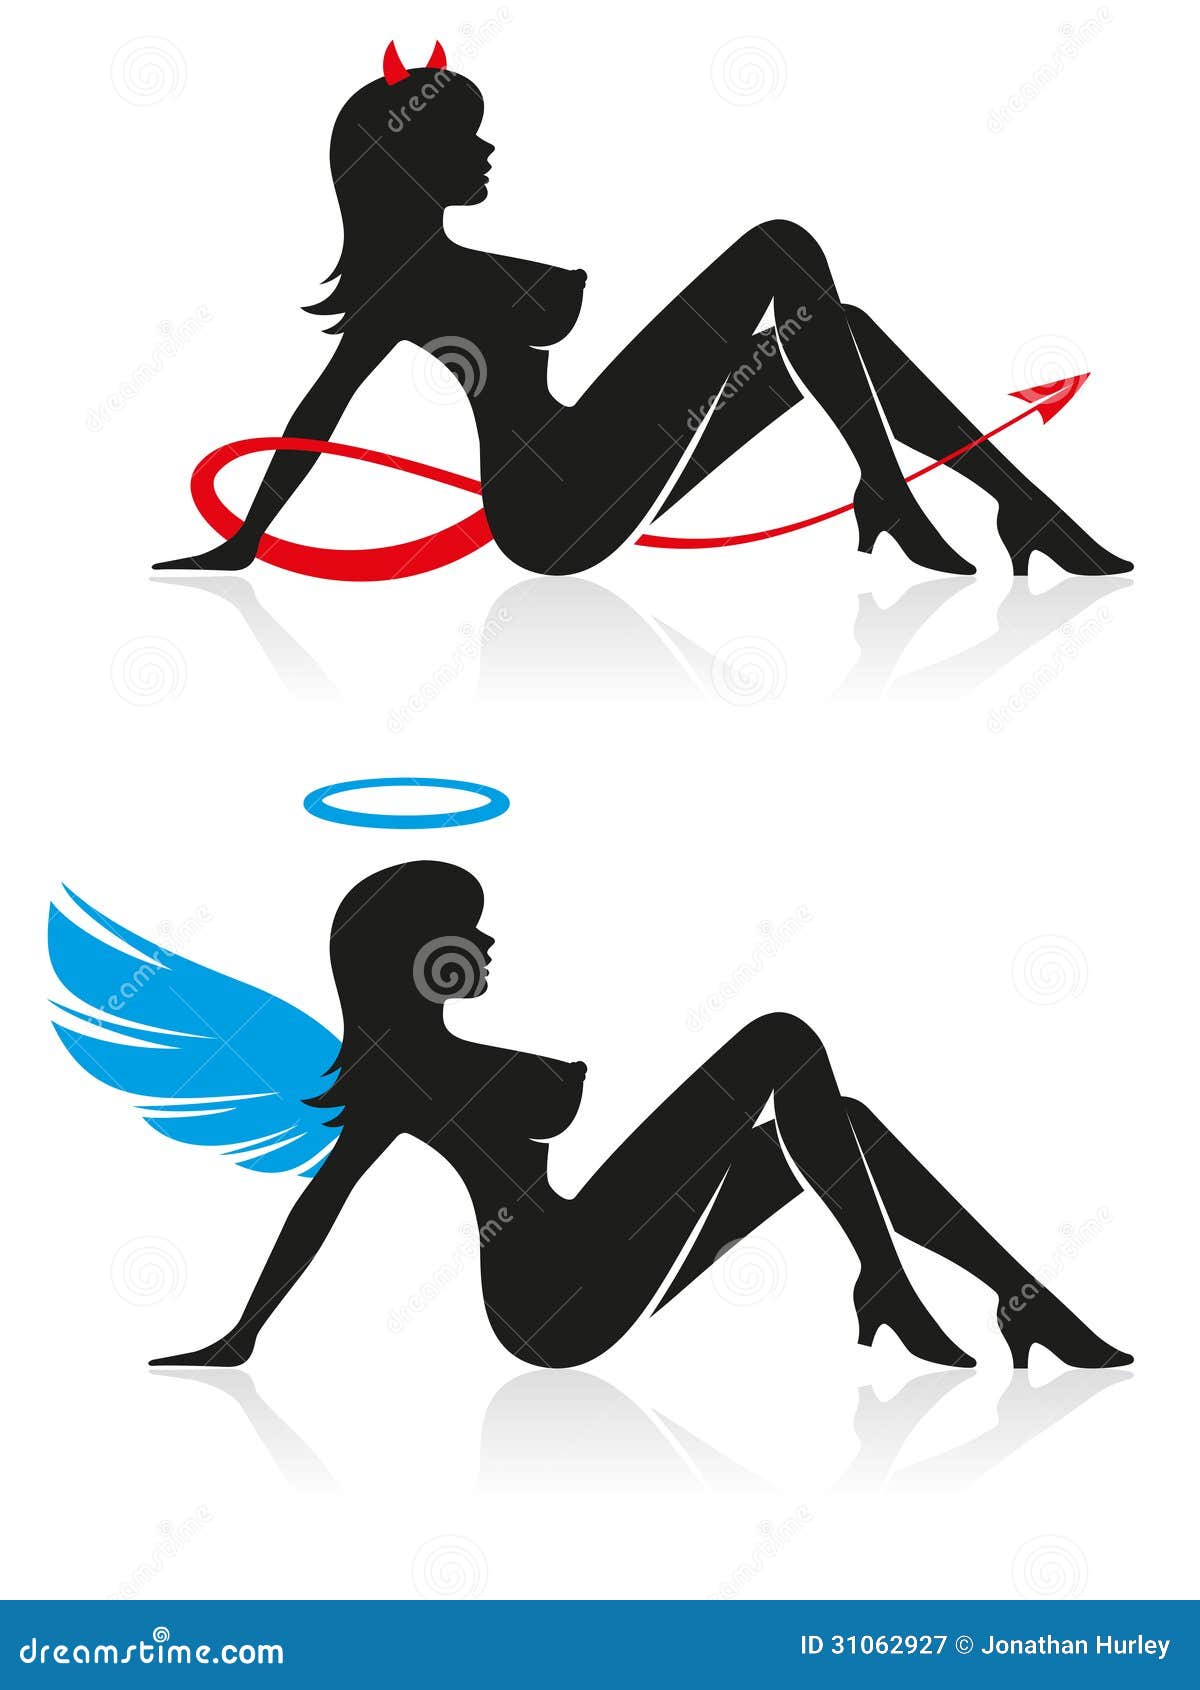 angel and devil silhouettes